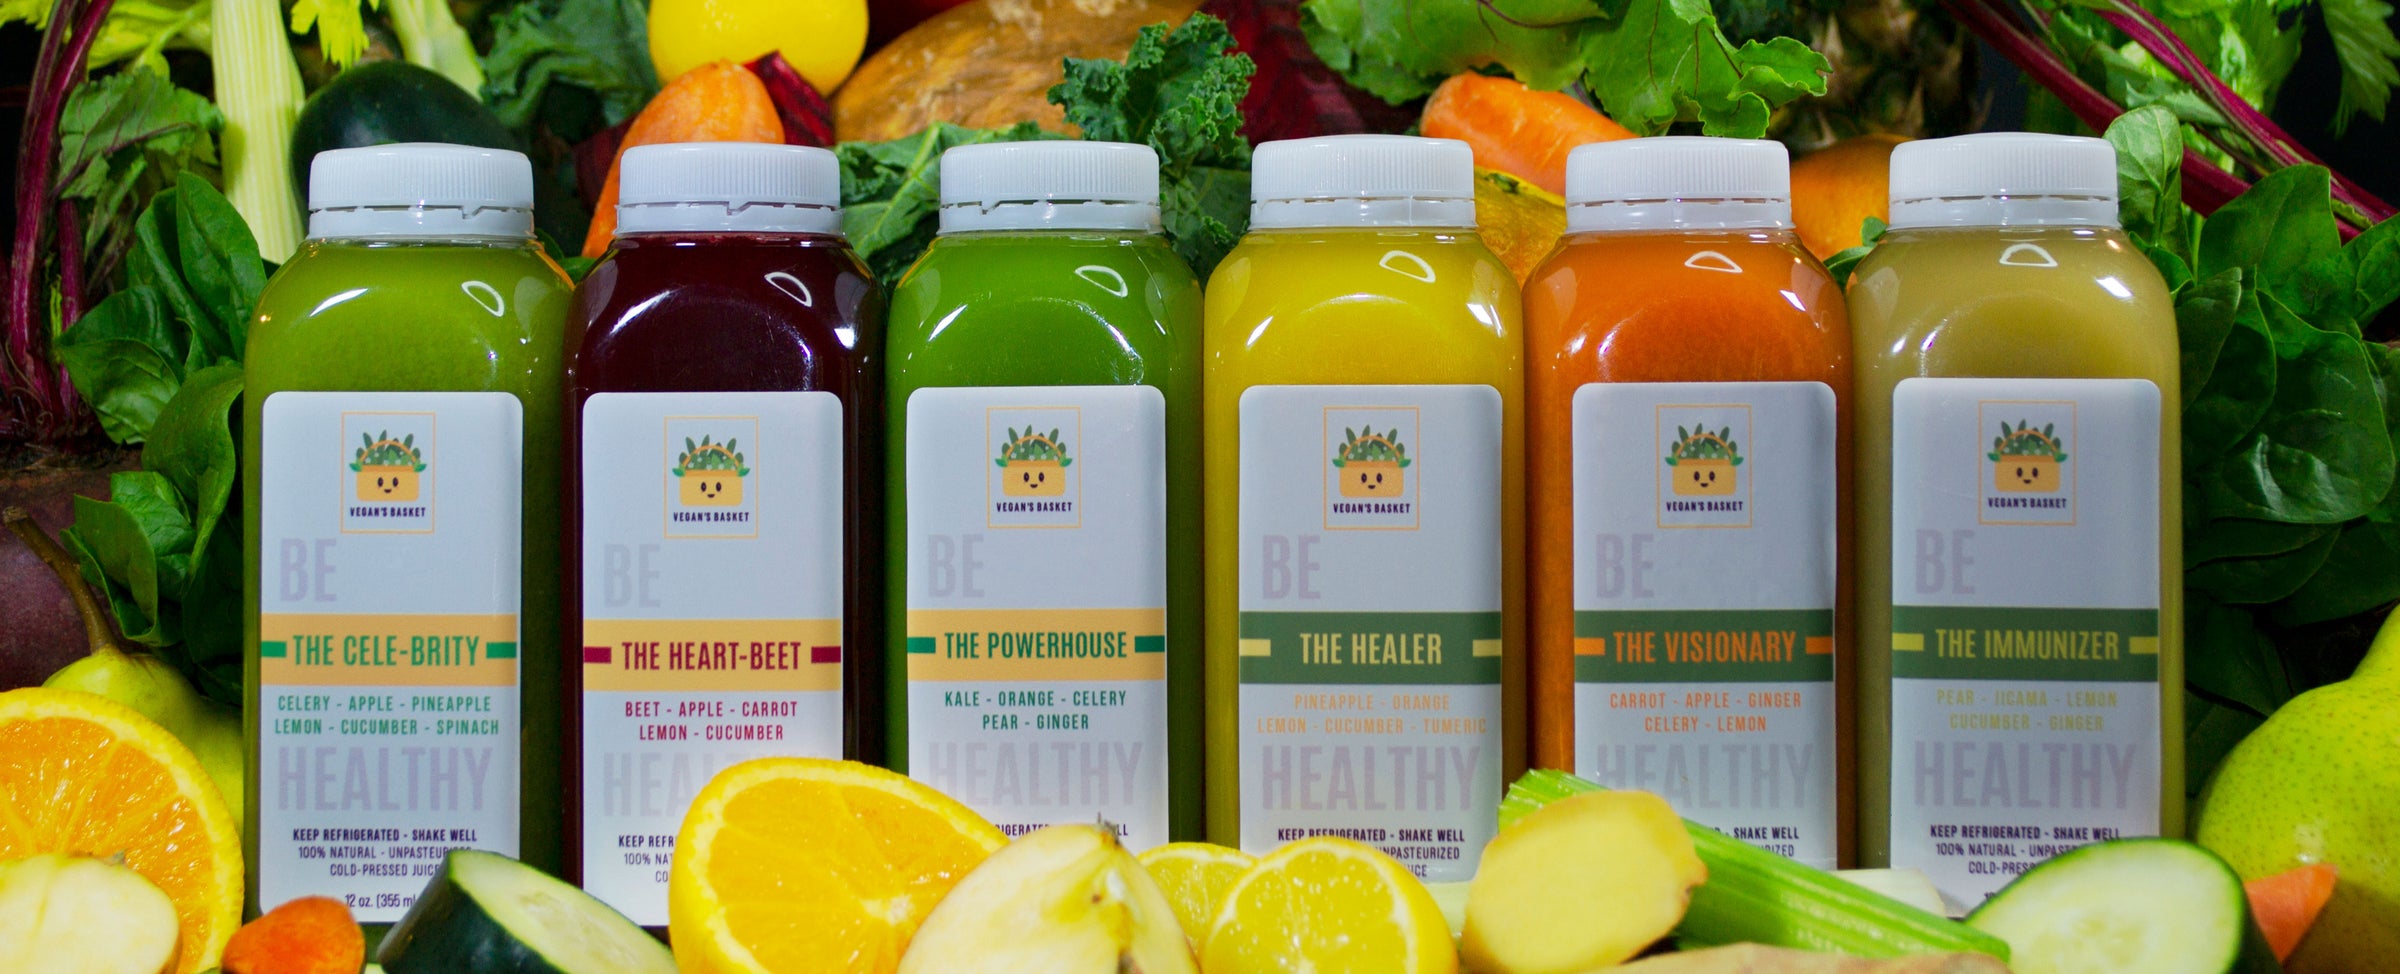 Cold-Pressed Juices from Vegan's Basket! We are getting ready to open